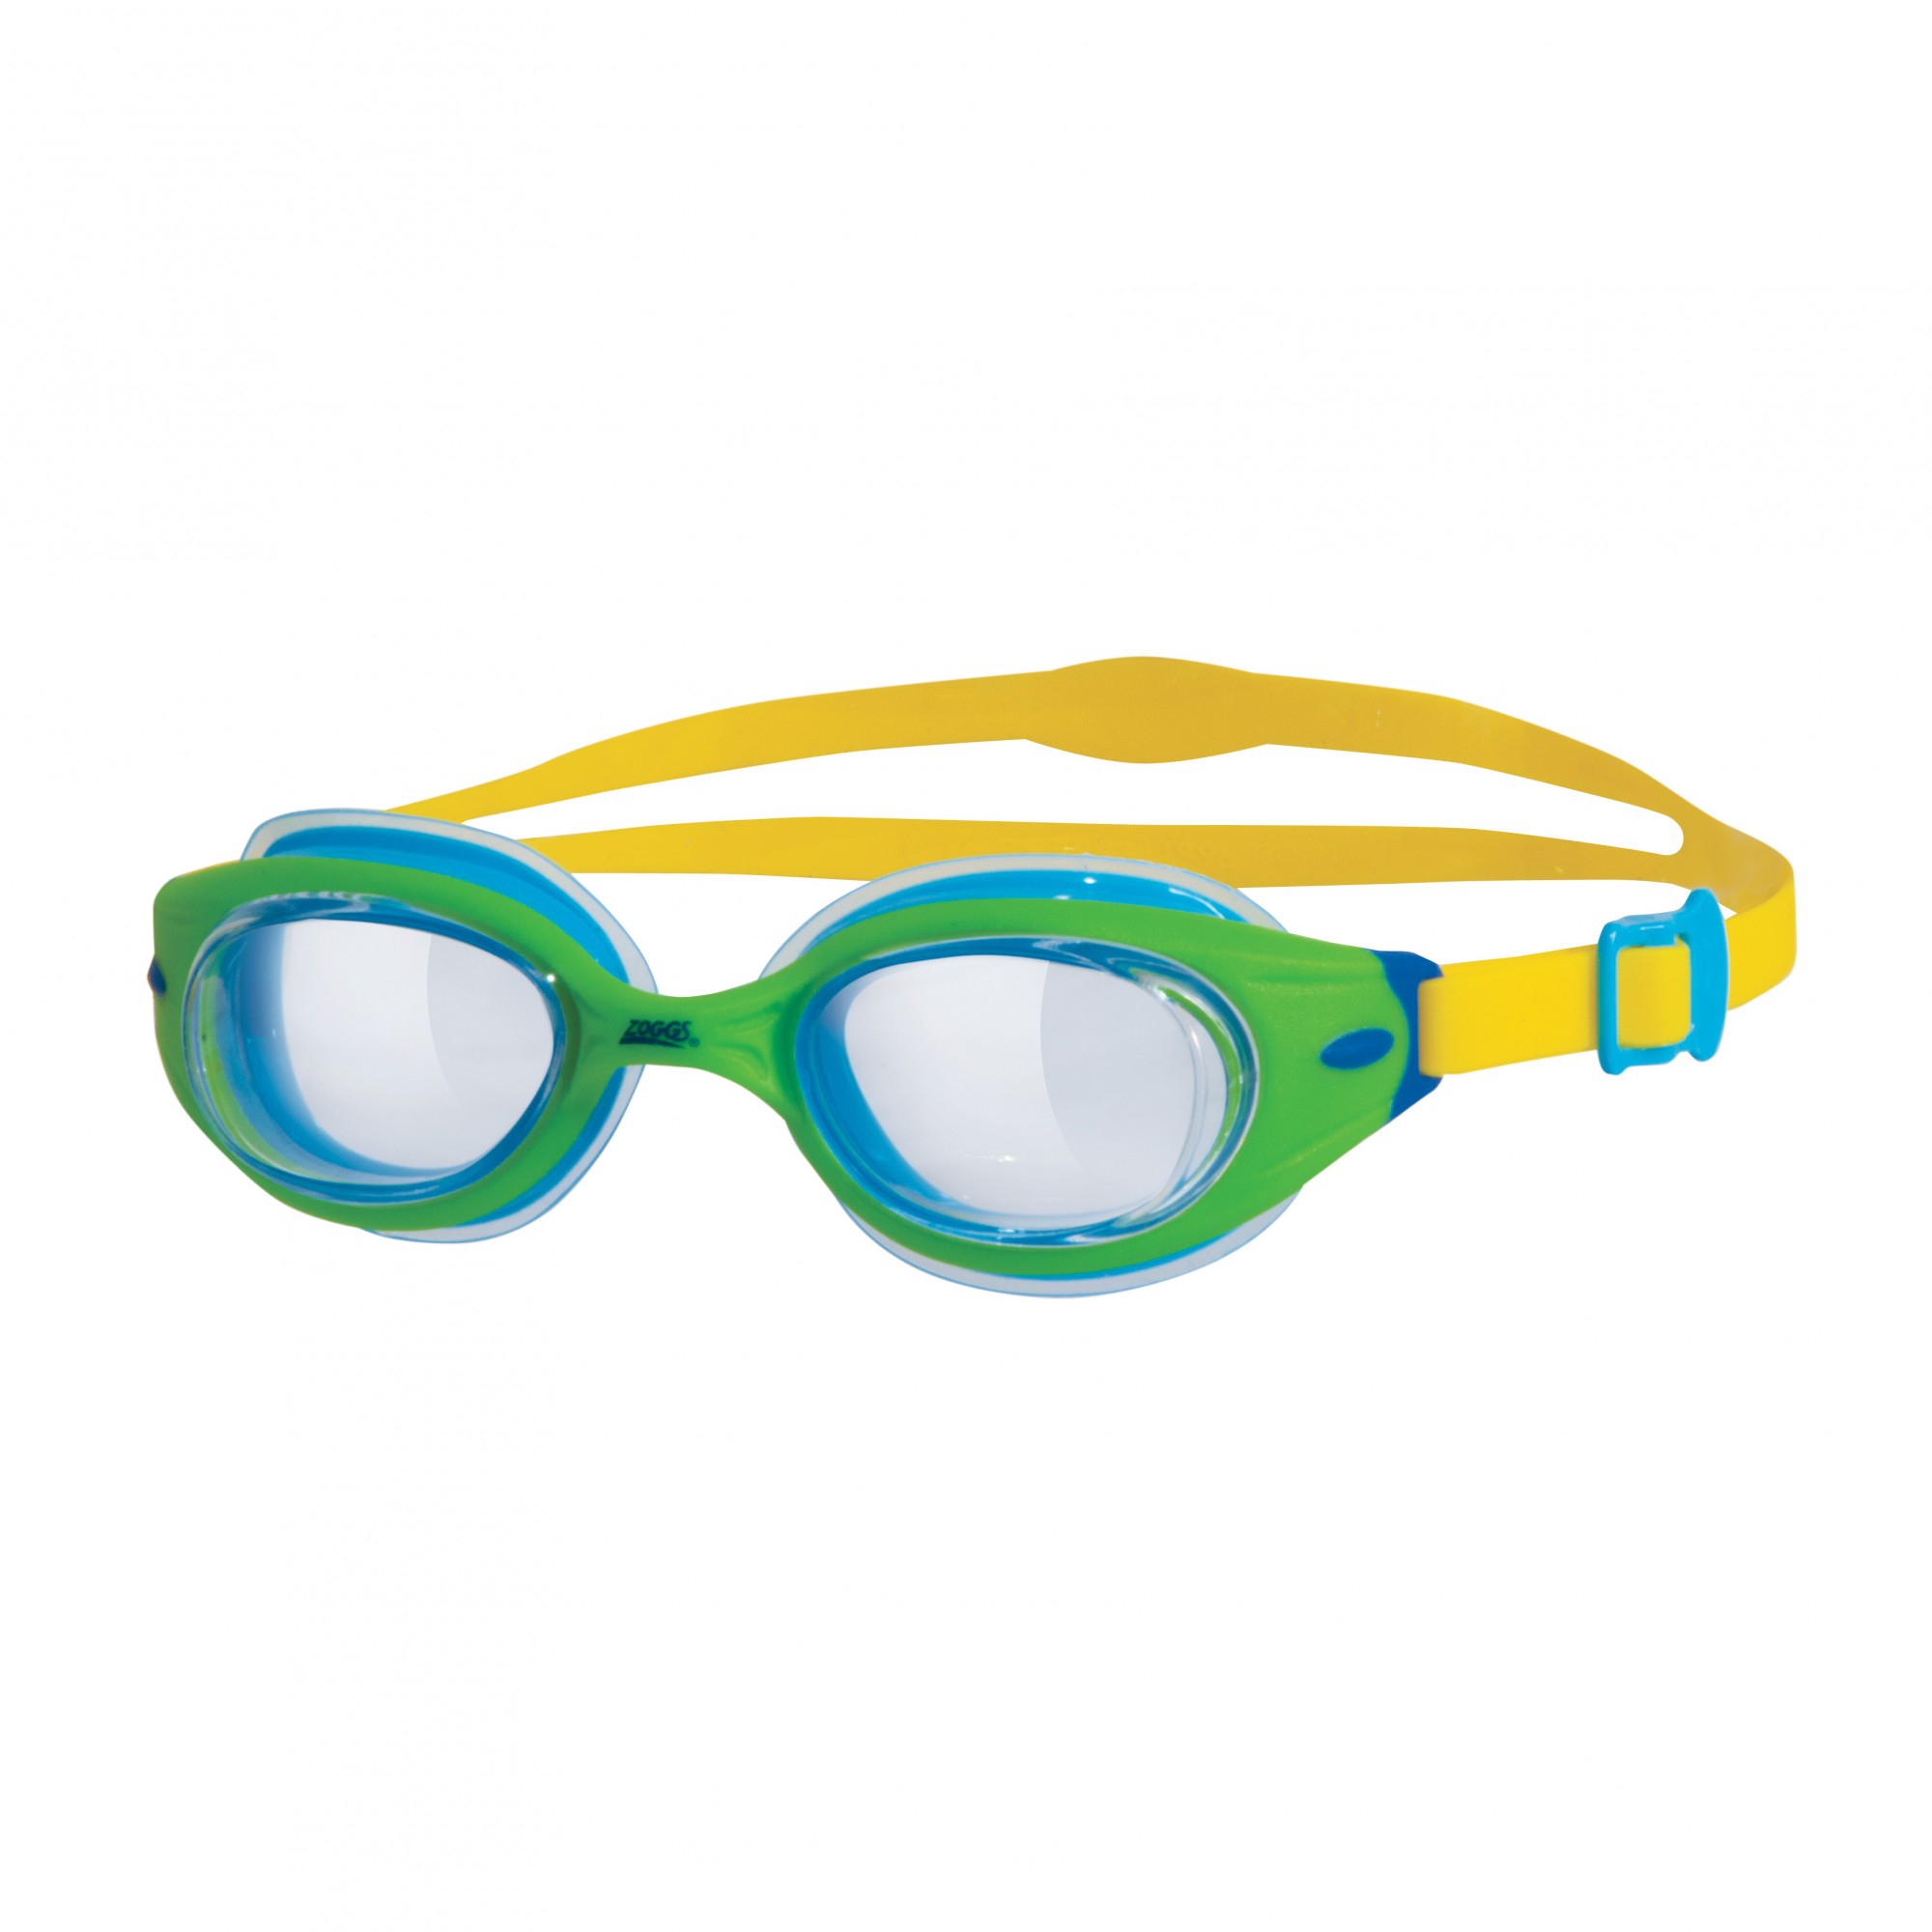 Little Sonic Air 'Green' Swimming Goggles 0-6 Years Pool